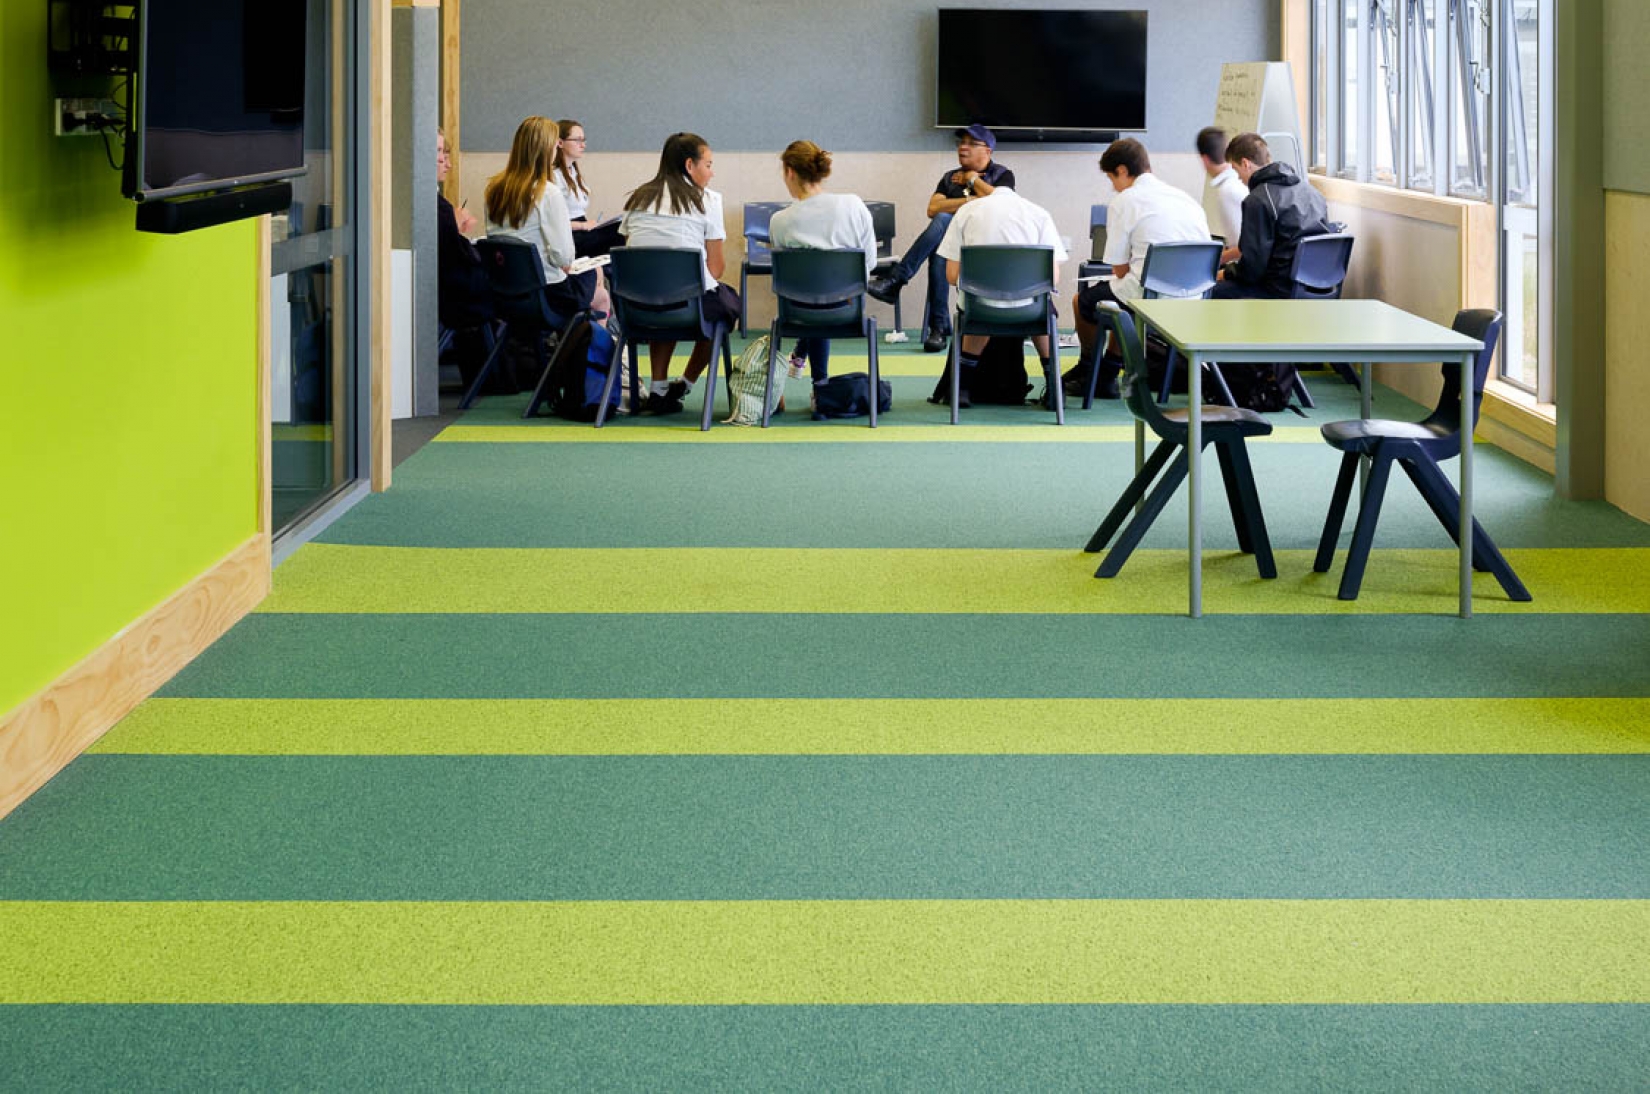 Defining learning environments with Advance Flooring